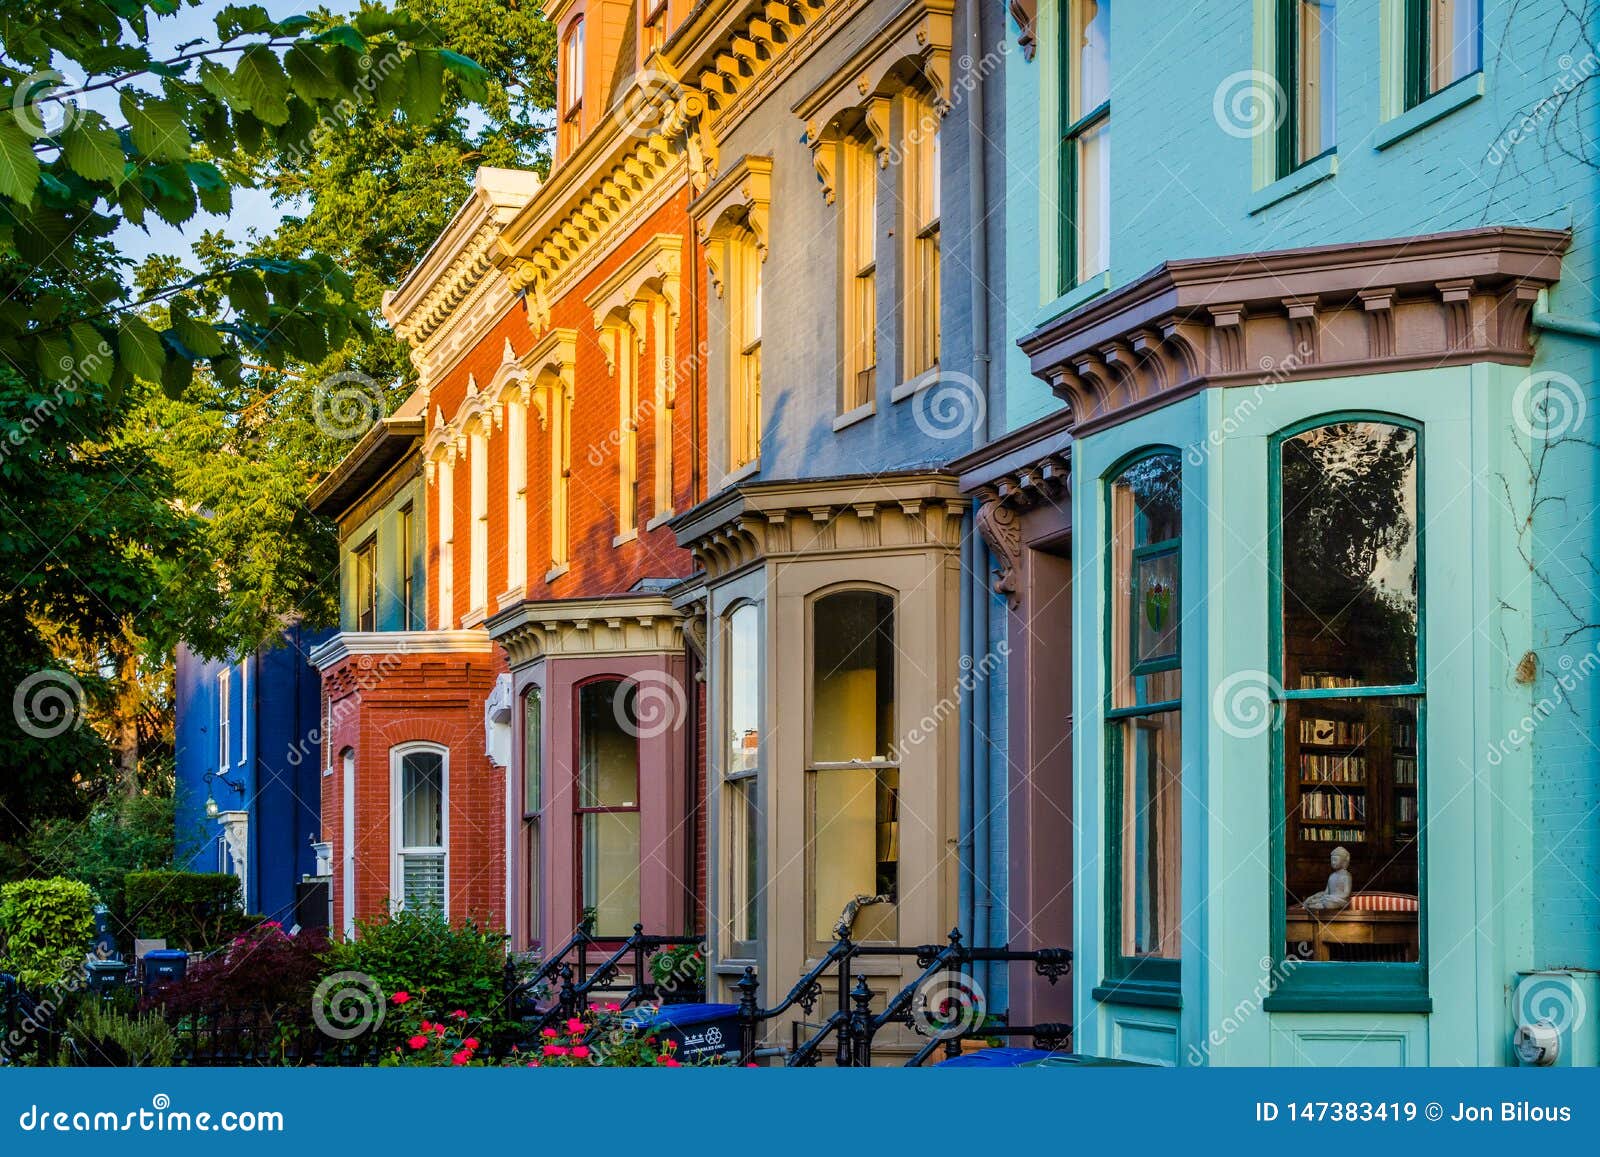 colorful row houses on independence avenue in capitol hill, washington, dc